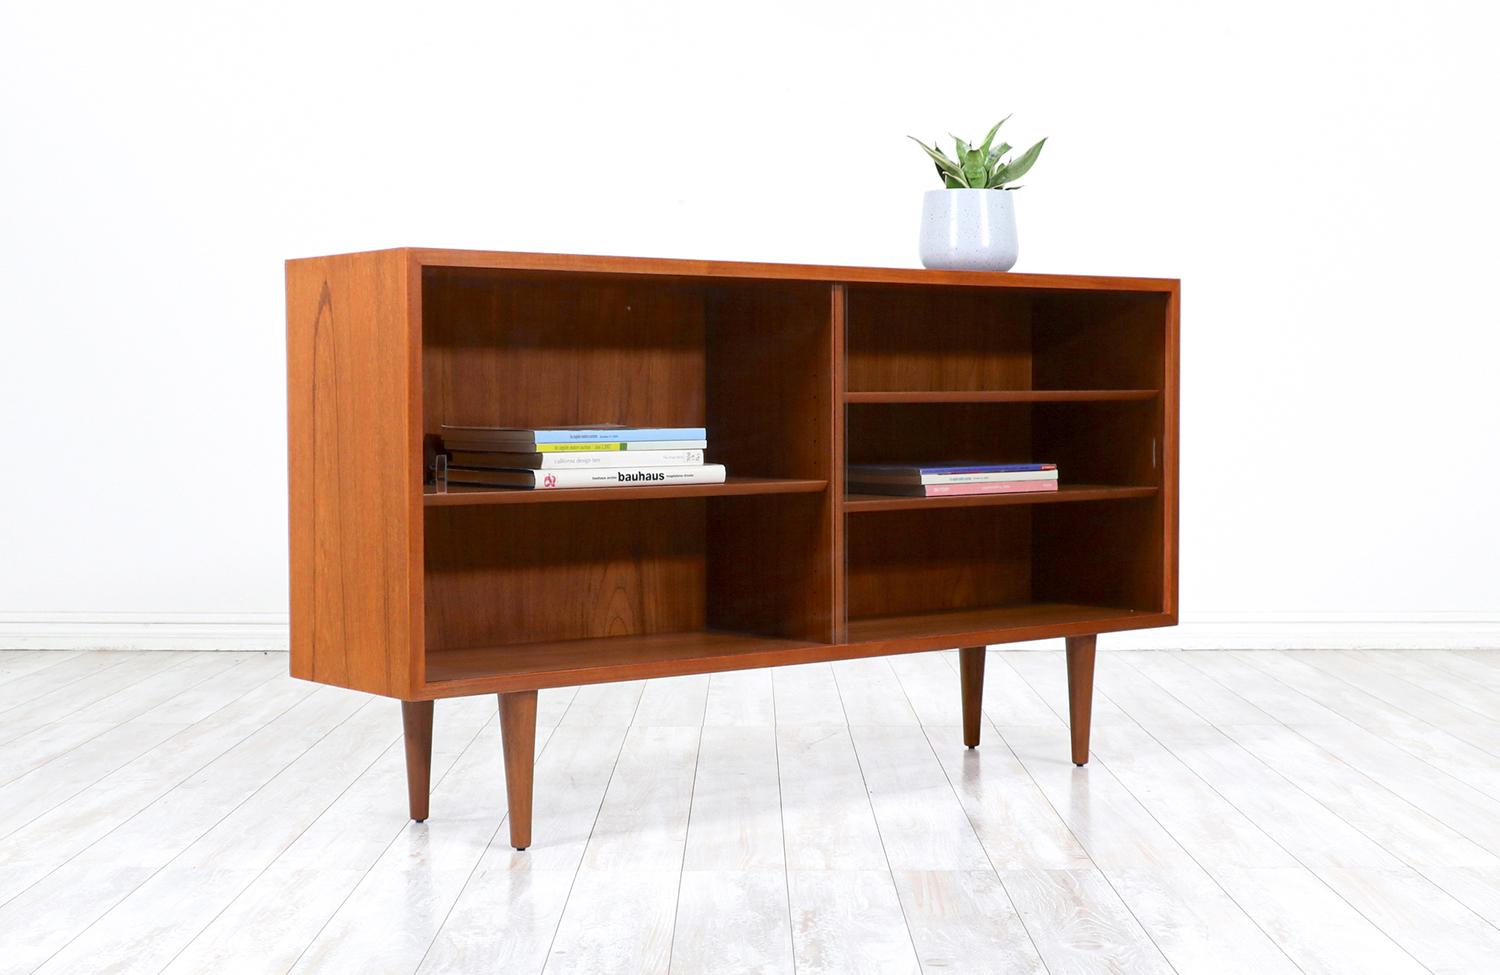 Stylish Danish credenza designed for Carlo Jensen for Hundevad & Co. in Denmark circa 1960s. This sleek design features a teak wood case sitting on four tapered legs with its original sliding glass doors. The interior is comprised of two